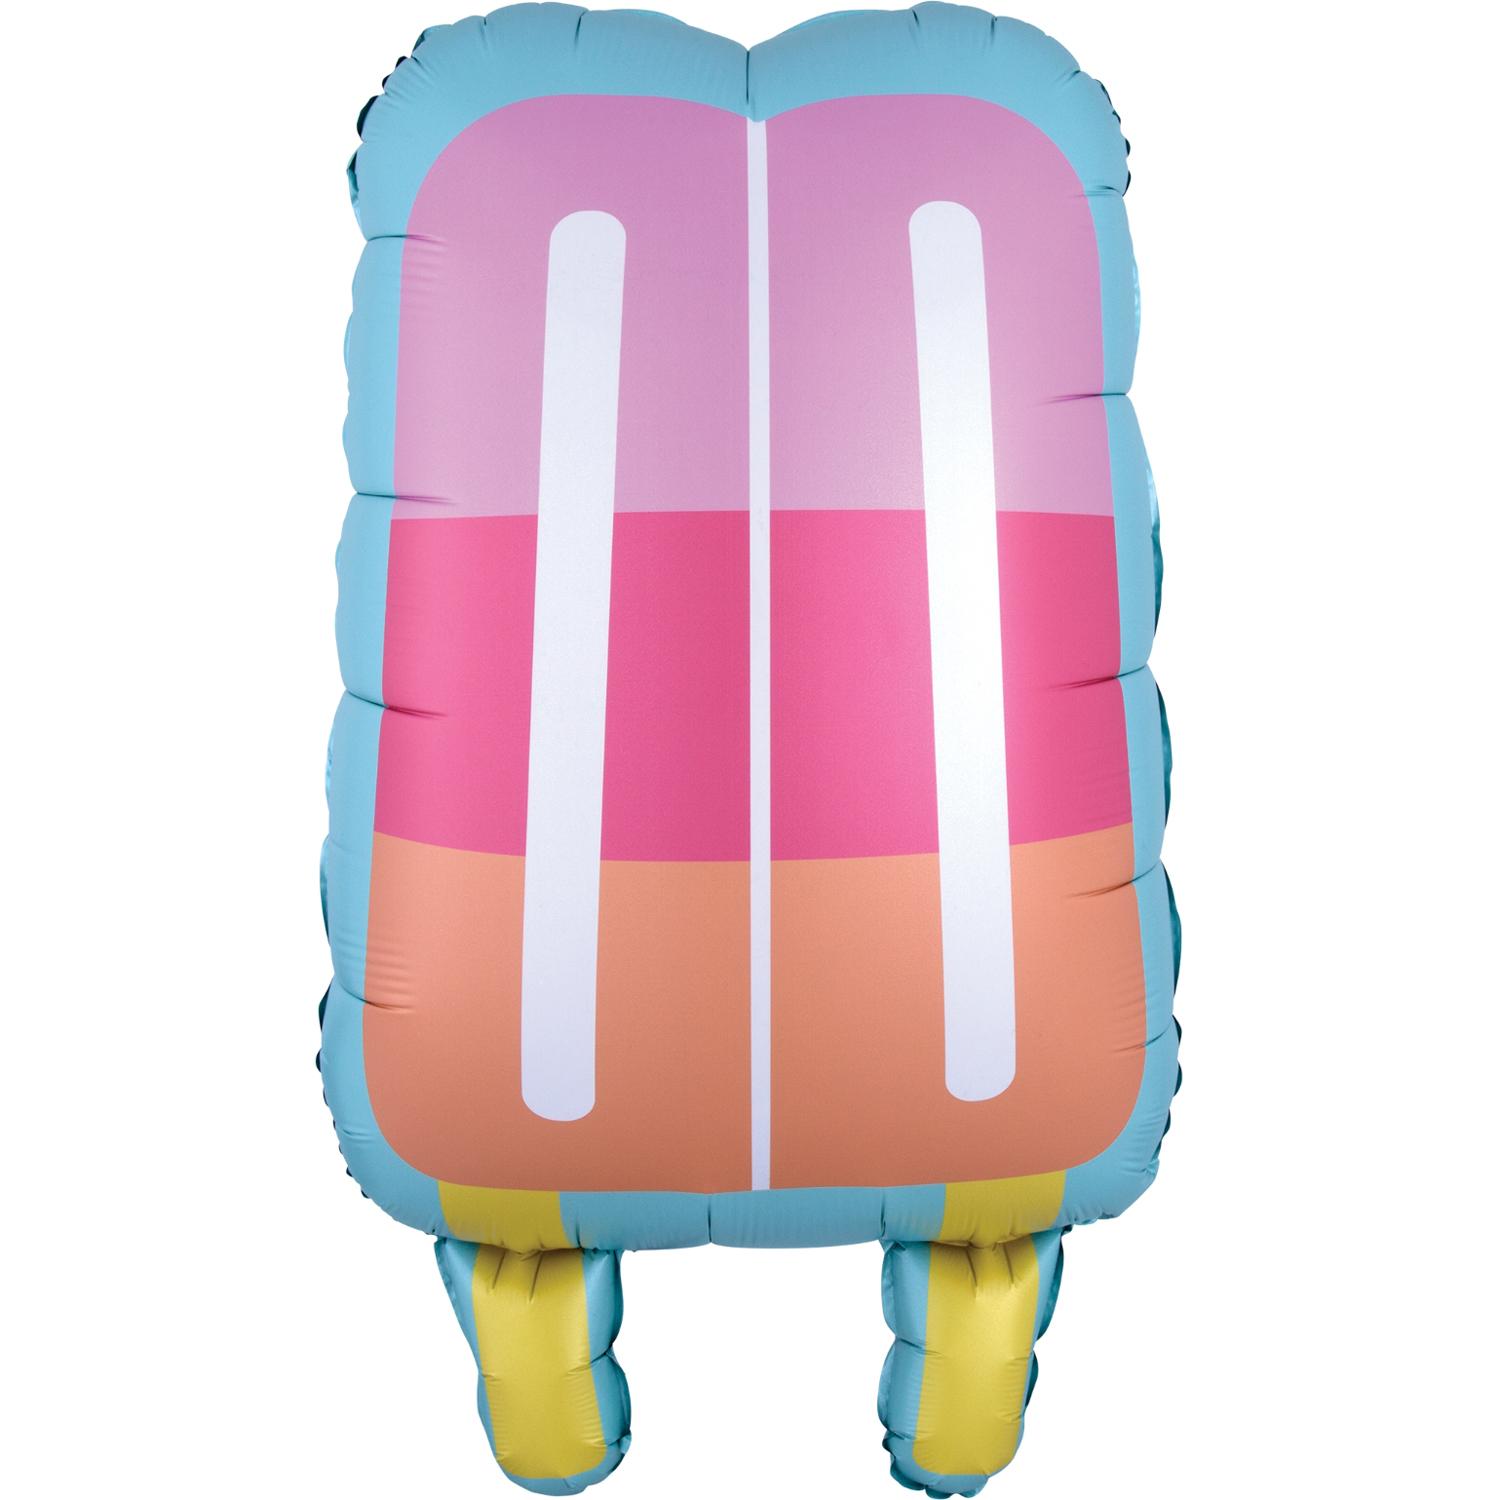 Just Chillin' Popsicle SuperShape Foil Balloon 45x76cm Balloons & Streamers - Party Centre